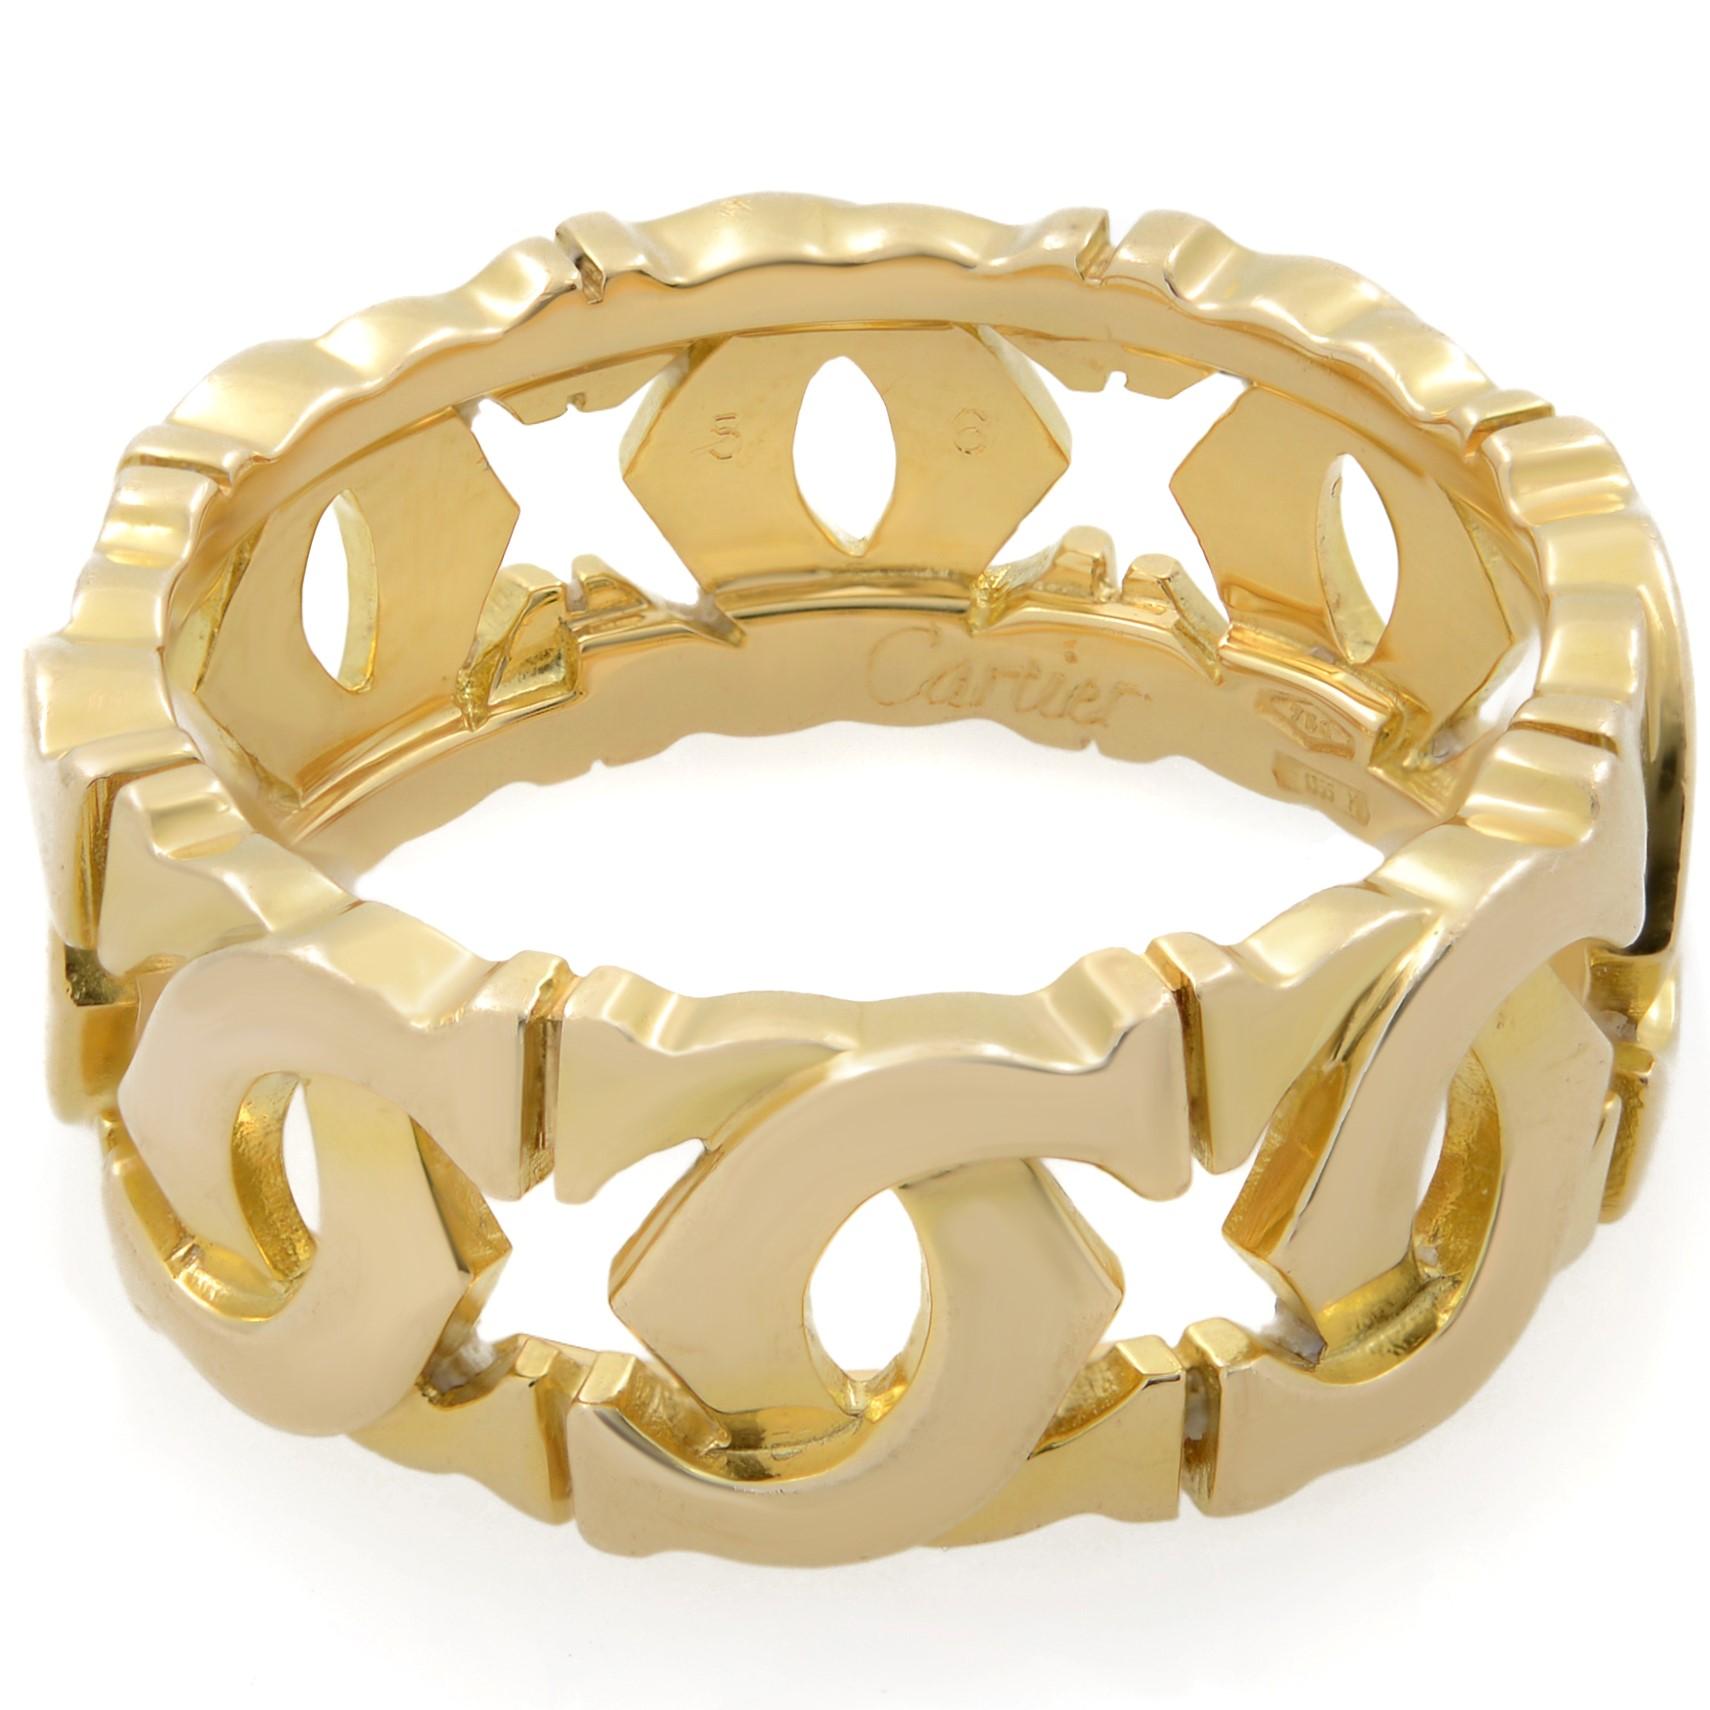 Cartier 18K Yellow Gold 2C Entrelaces Ring. Size 56 US 7.5. Width: 8.00mm. Hallmarked with brand name, gold type and serial number. Excellent pre-owned condition. Original box and papers are not included. 
